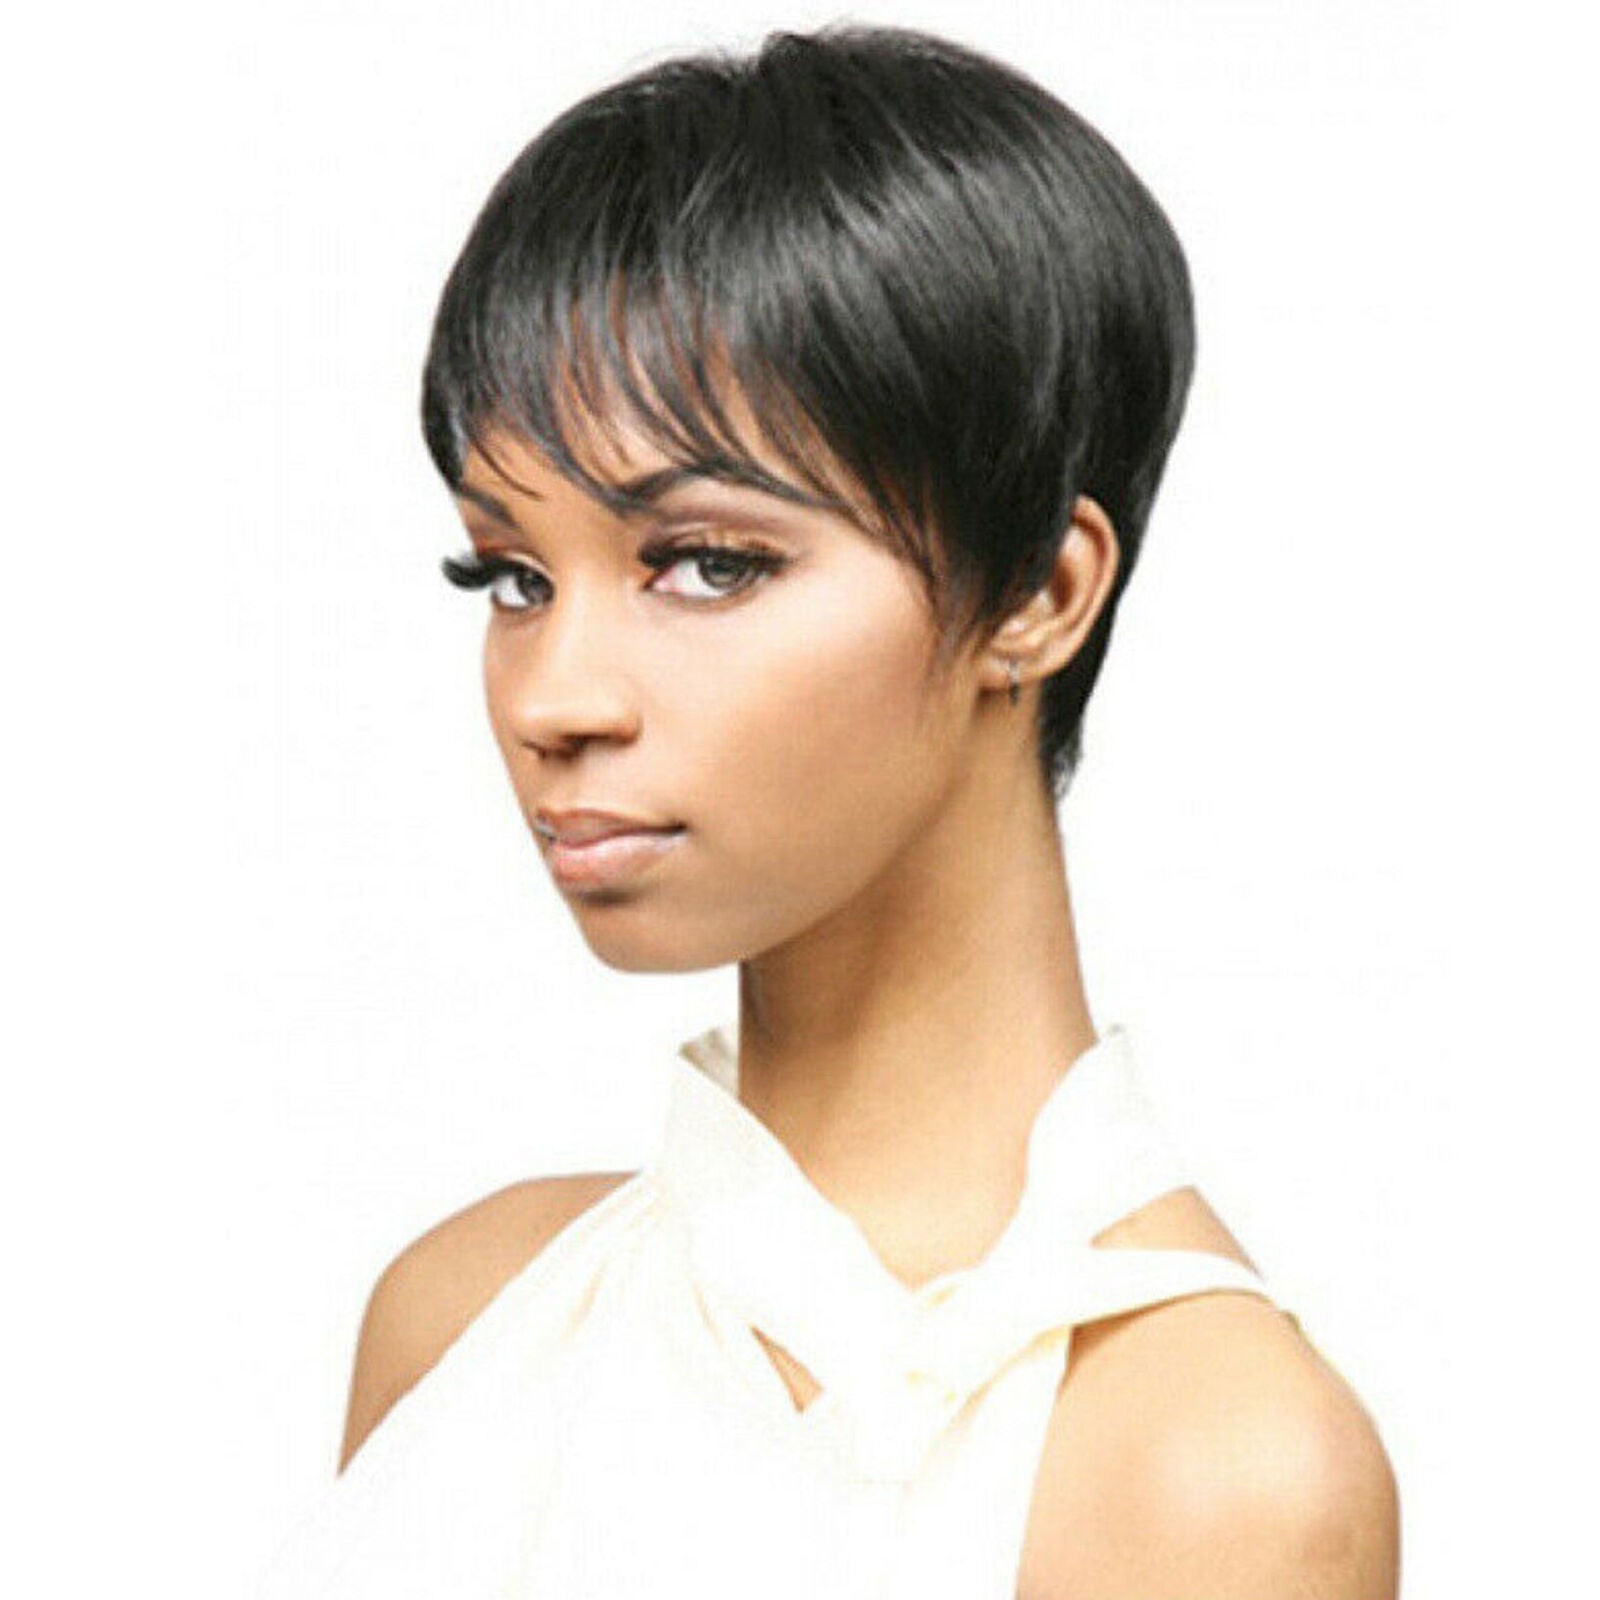 Women's Black Wig Short Straight Synthetic Hair w/Lace Natural Fashion Looking